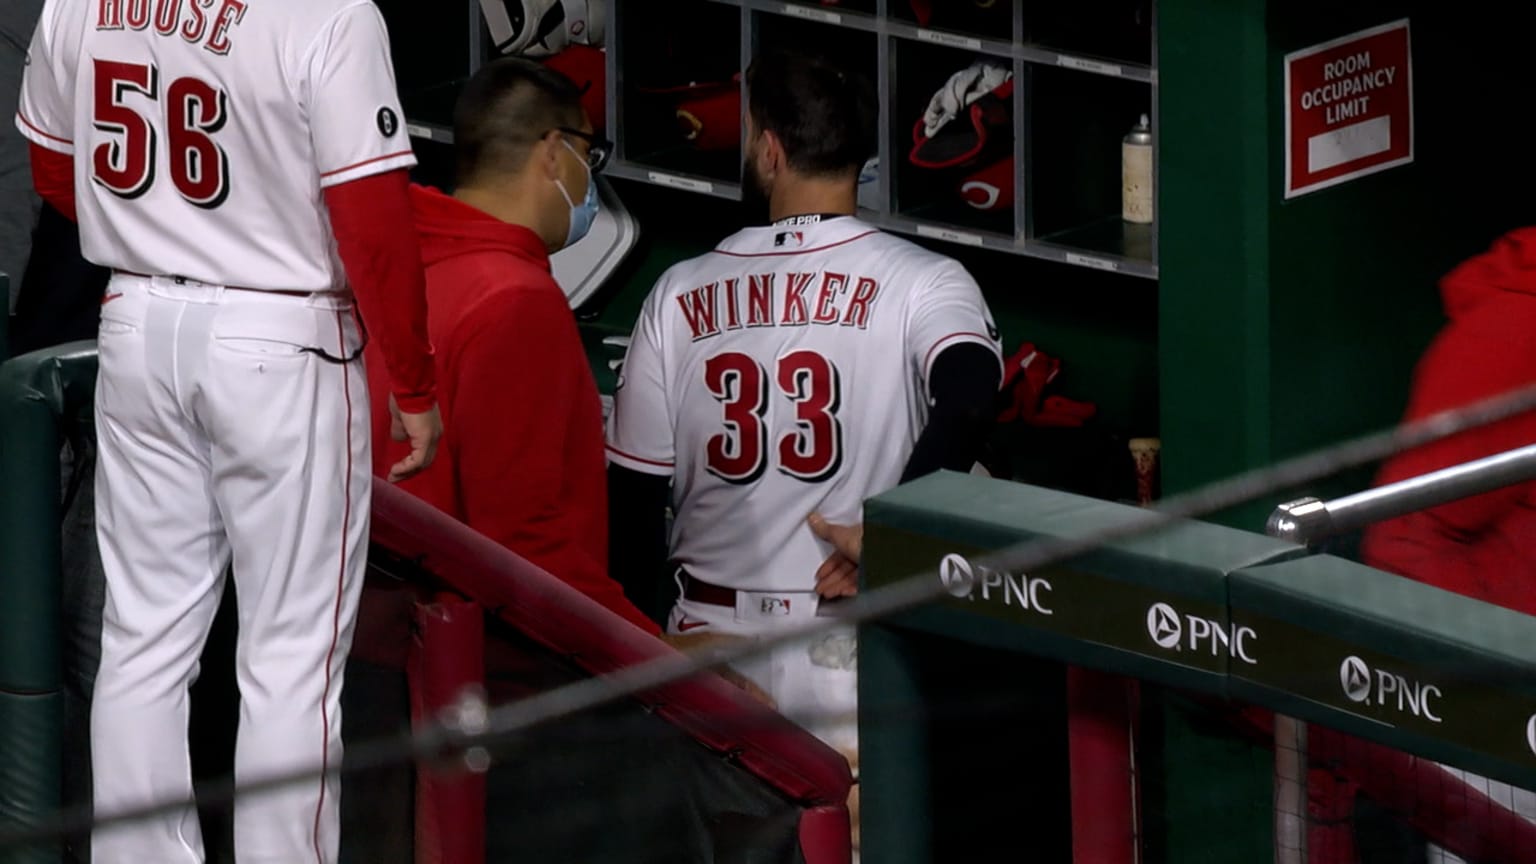 Jesse Winker is returning to the Reds on Friday - Redleg Nation